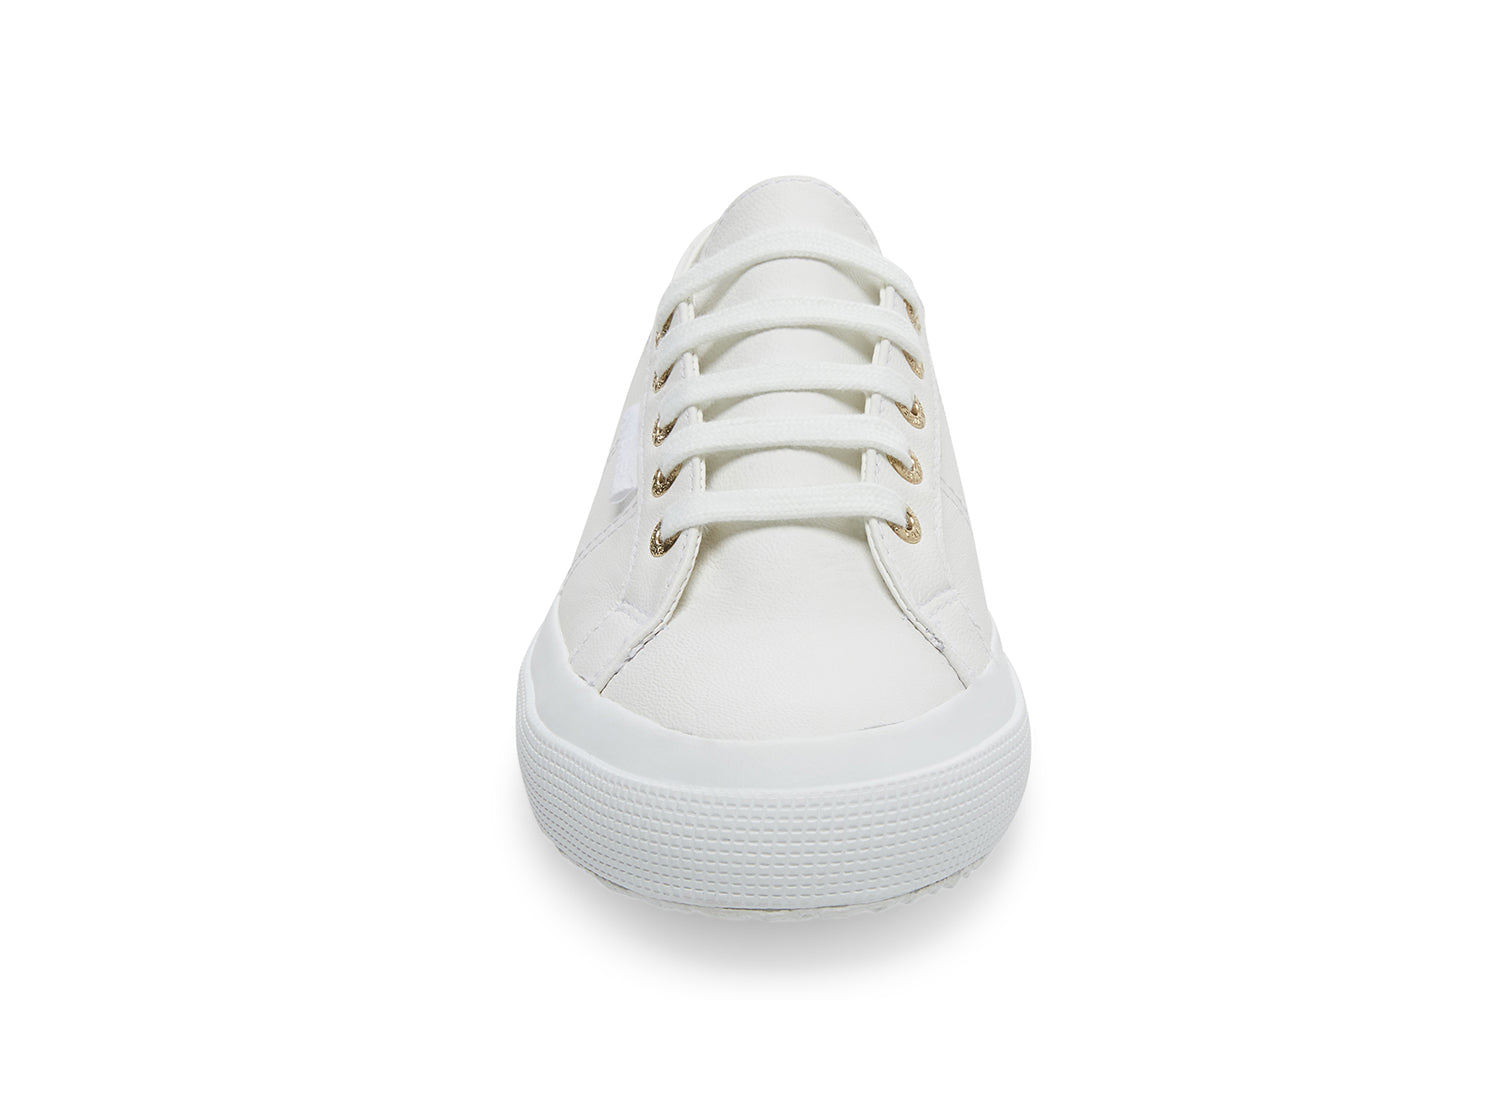 how to clean leather superga shoes